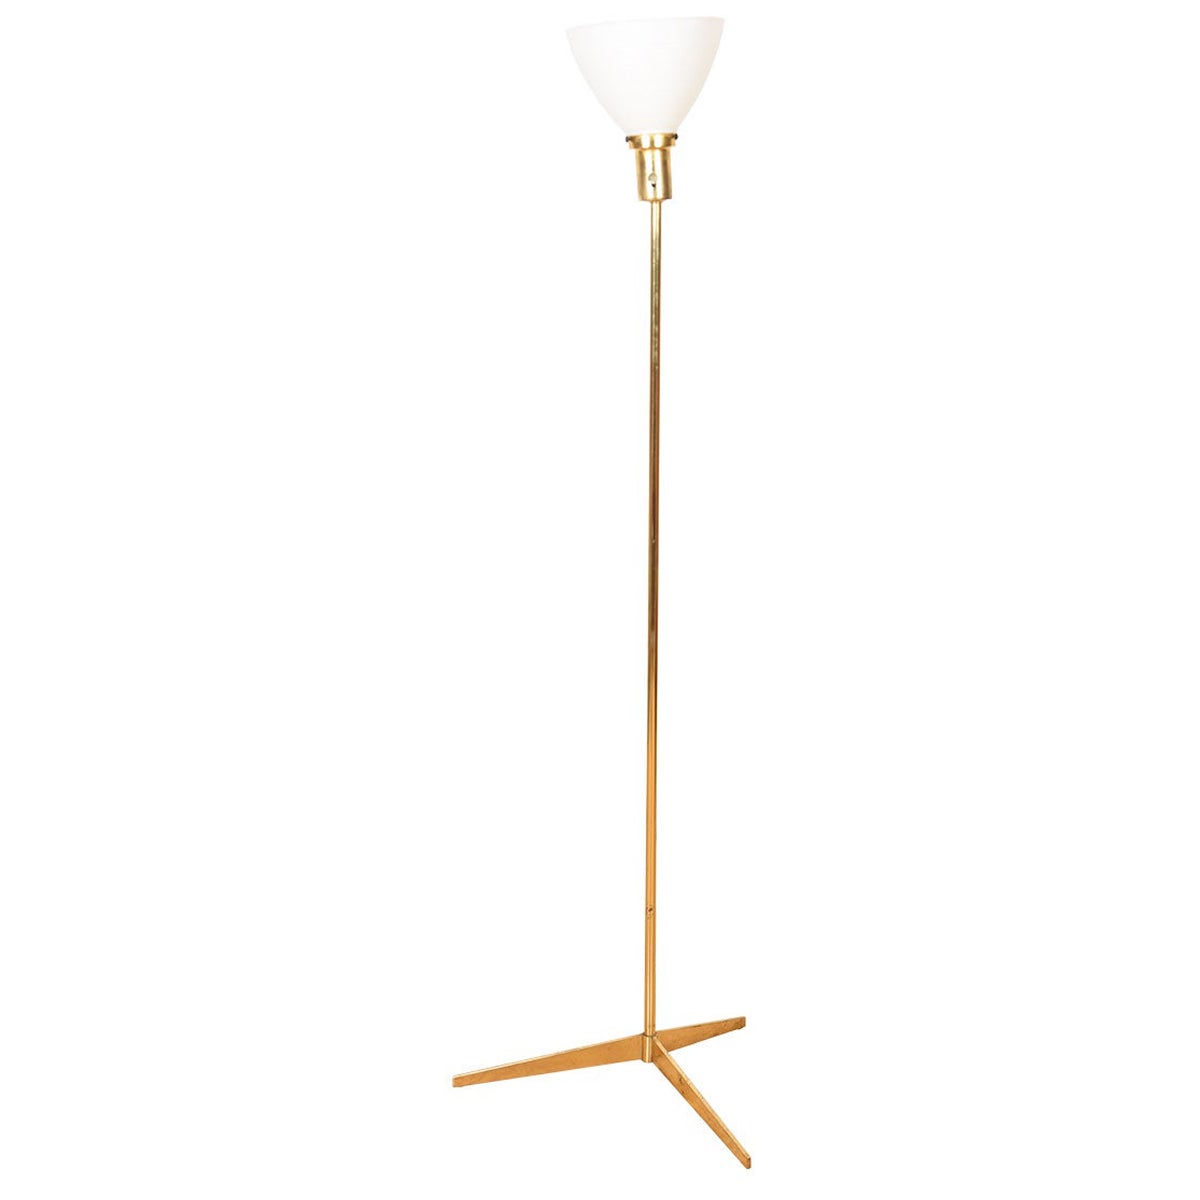 Midcentury Paul McCobb Brass Tripod ‘Torchiere’ Accent Lamp For Sale